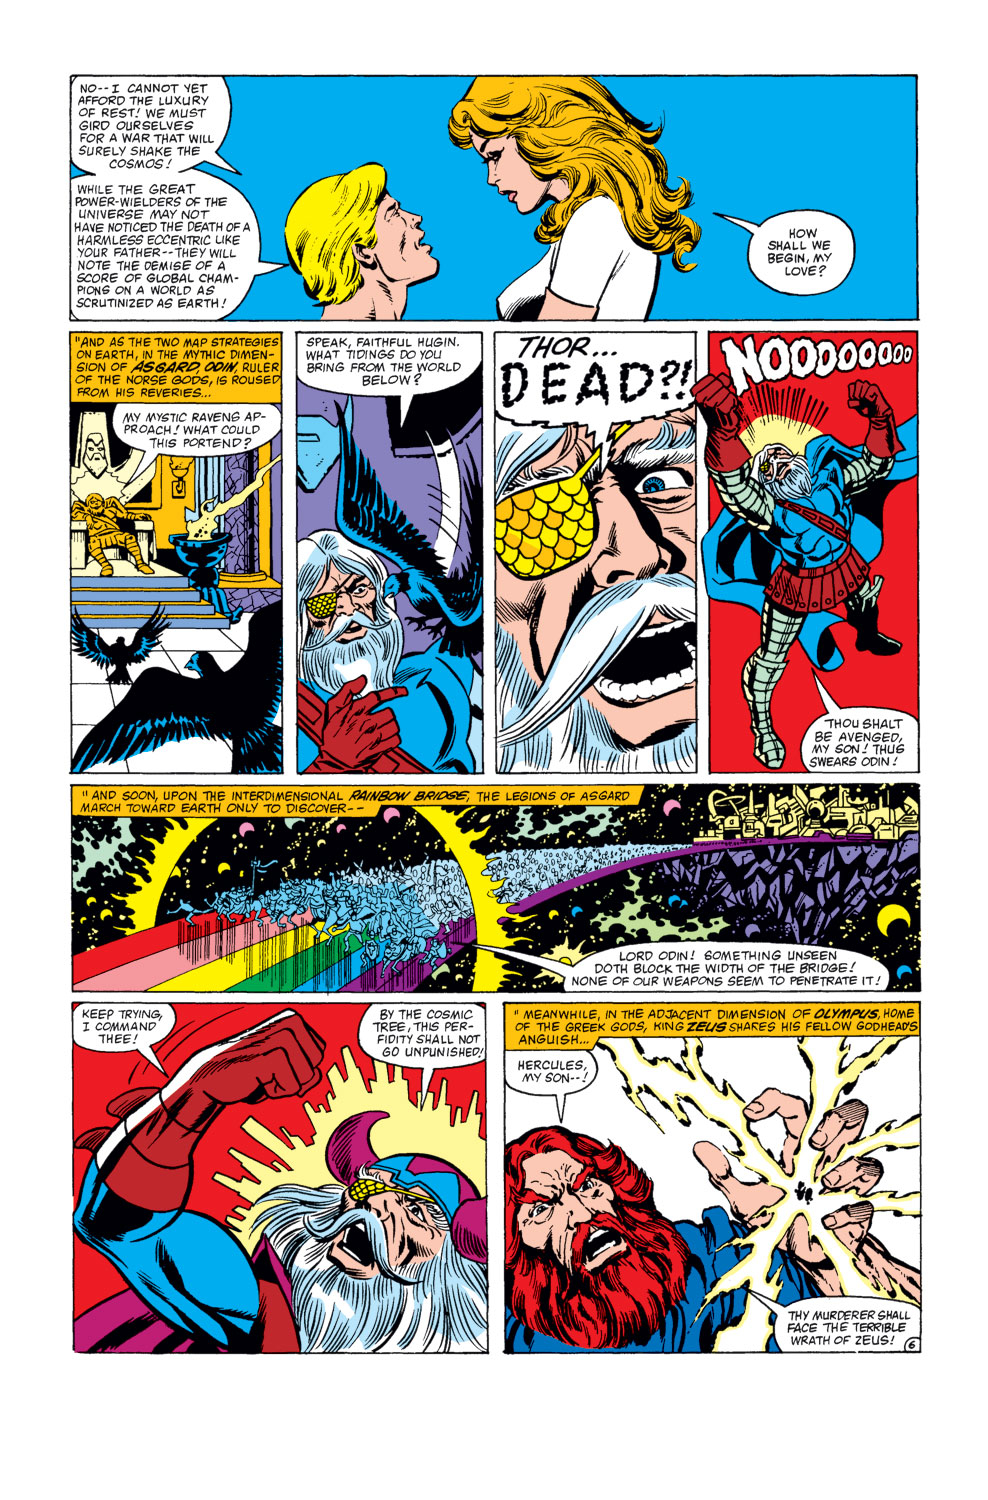 What If? (1977) issue 32 - The Avengers had become pawns of Korvac - Page 7